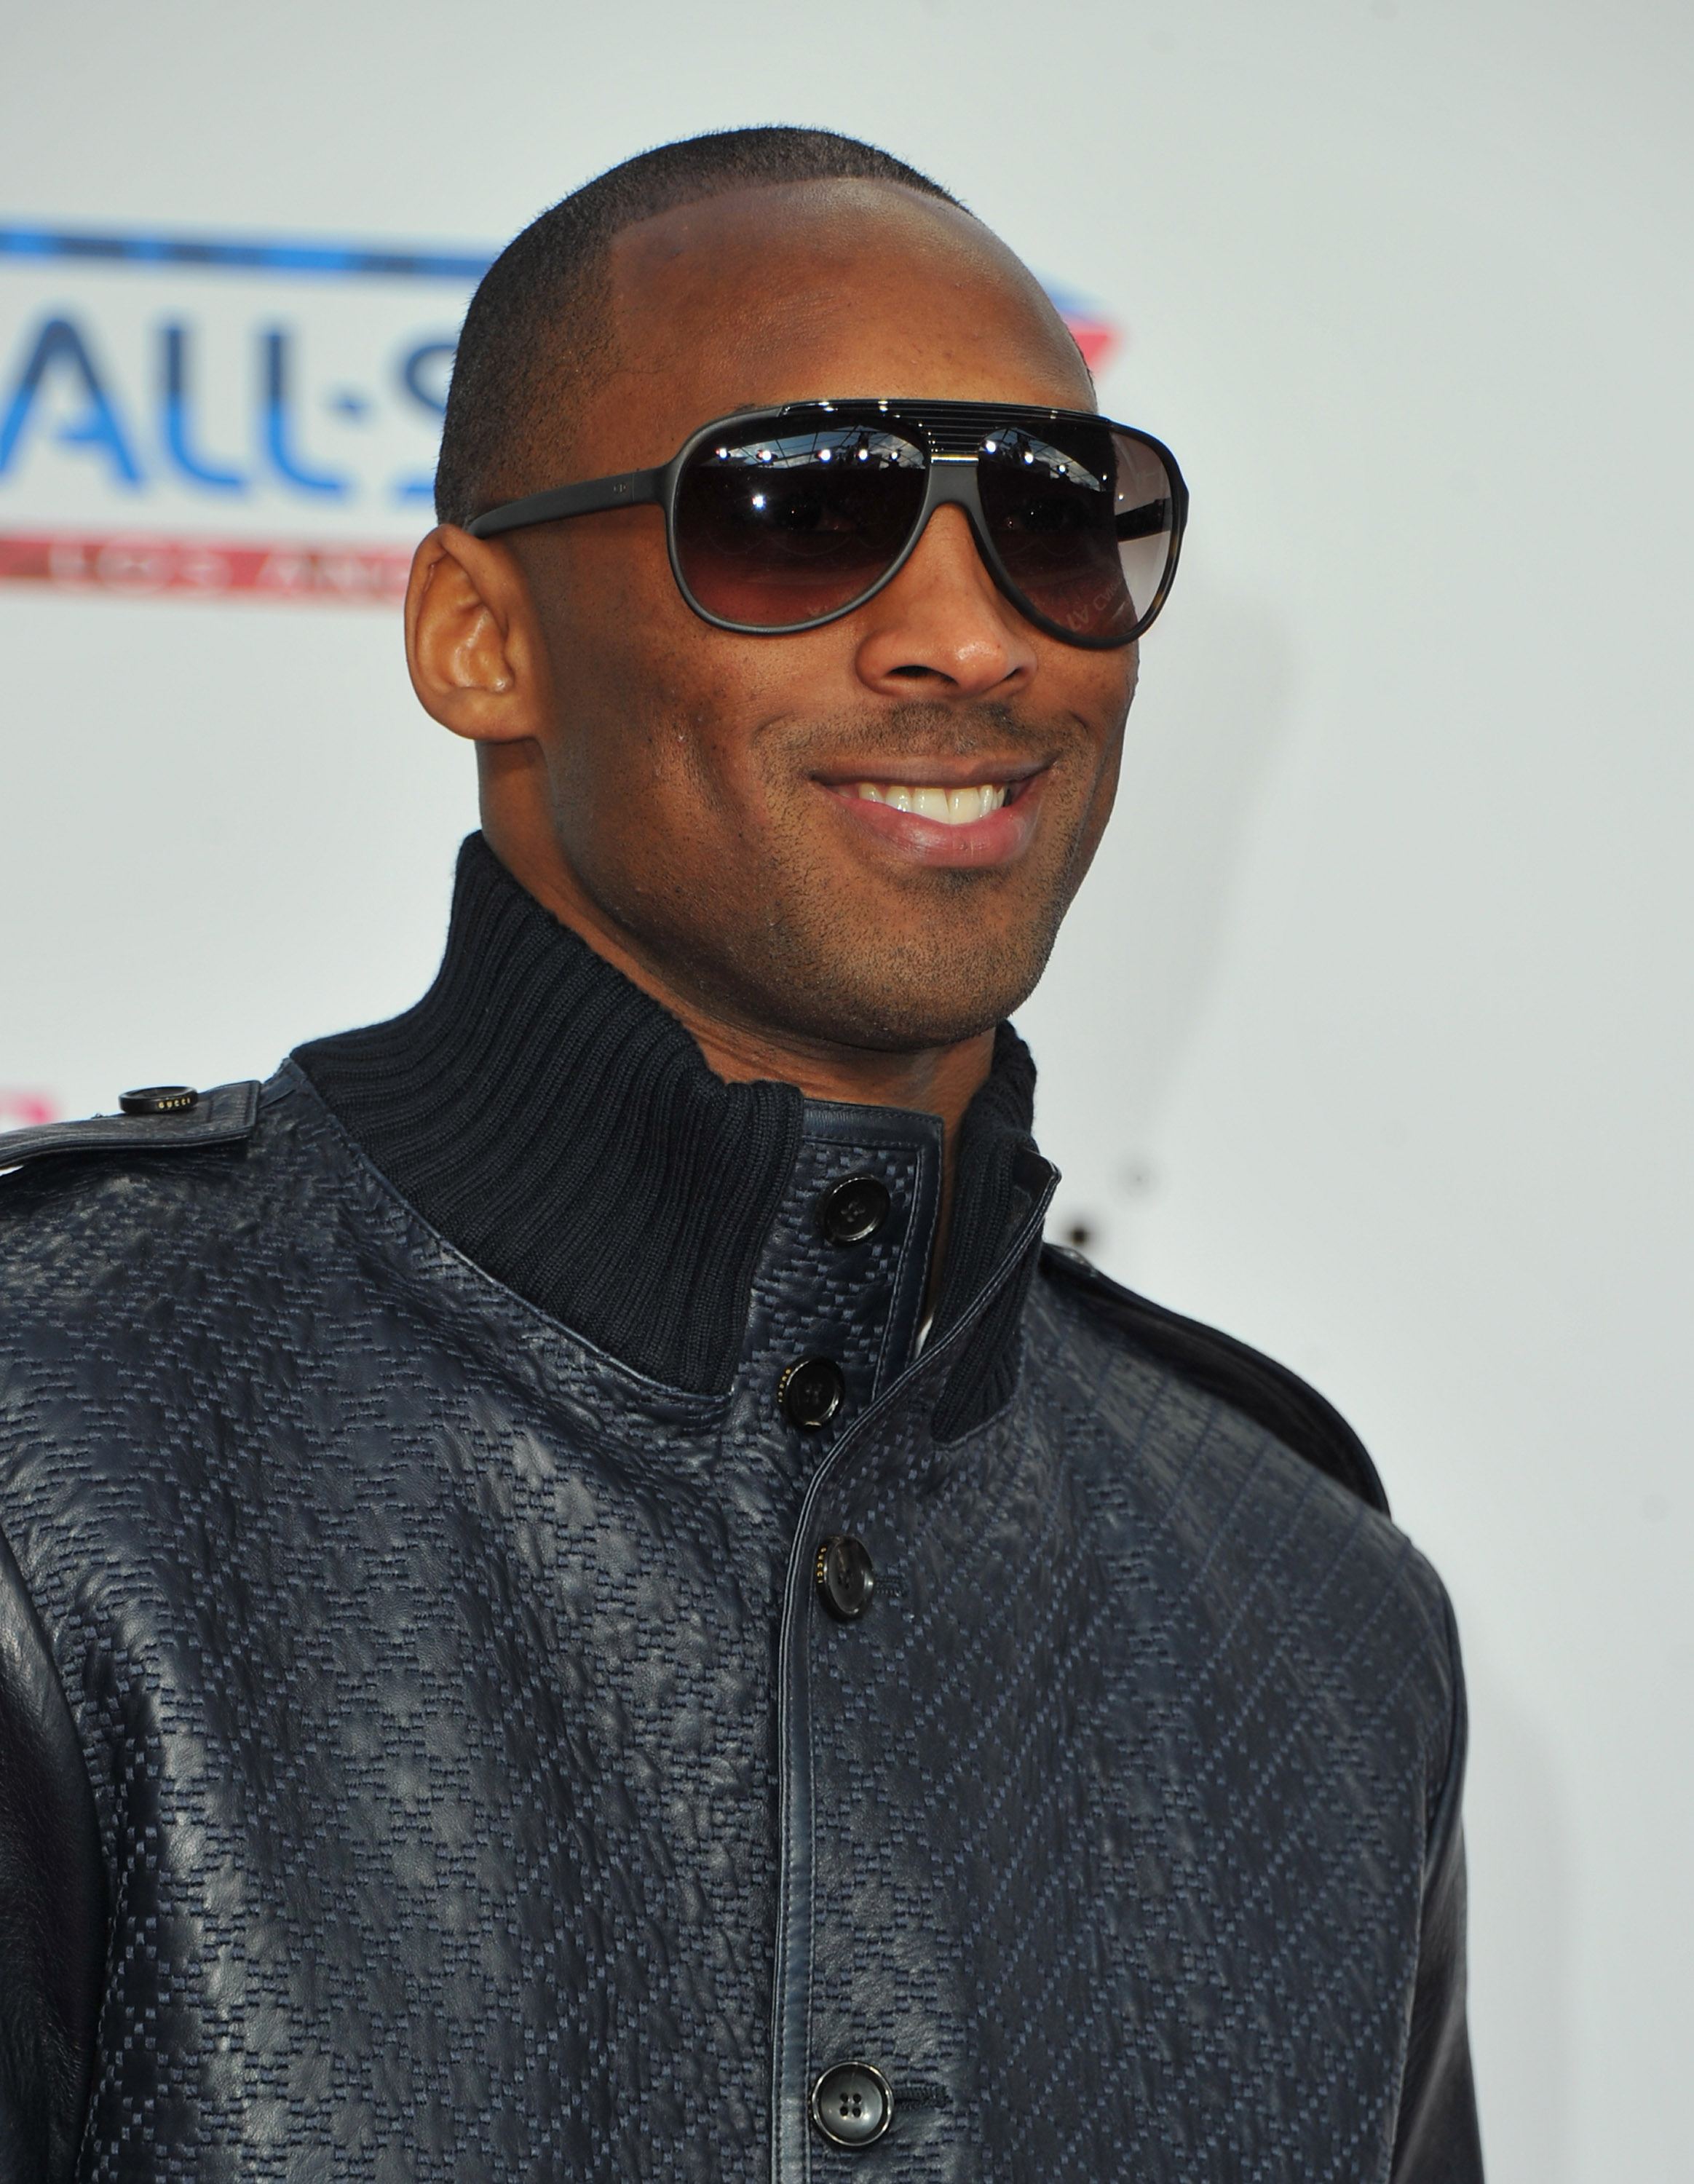 LOS ANGELES, CA - FEBRUARY 20:  NBA player Kobe Bryant arrives to the T-Mobile Magenta Carpet at the 2011 NBA All-Star Game on February 20, 2011 in Los Angeles, California.  (Photo by Alberto E. Rodriguez/Getty Images)